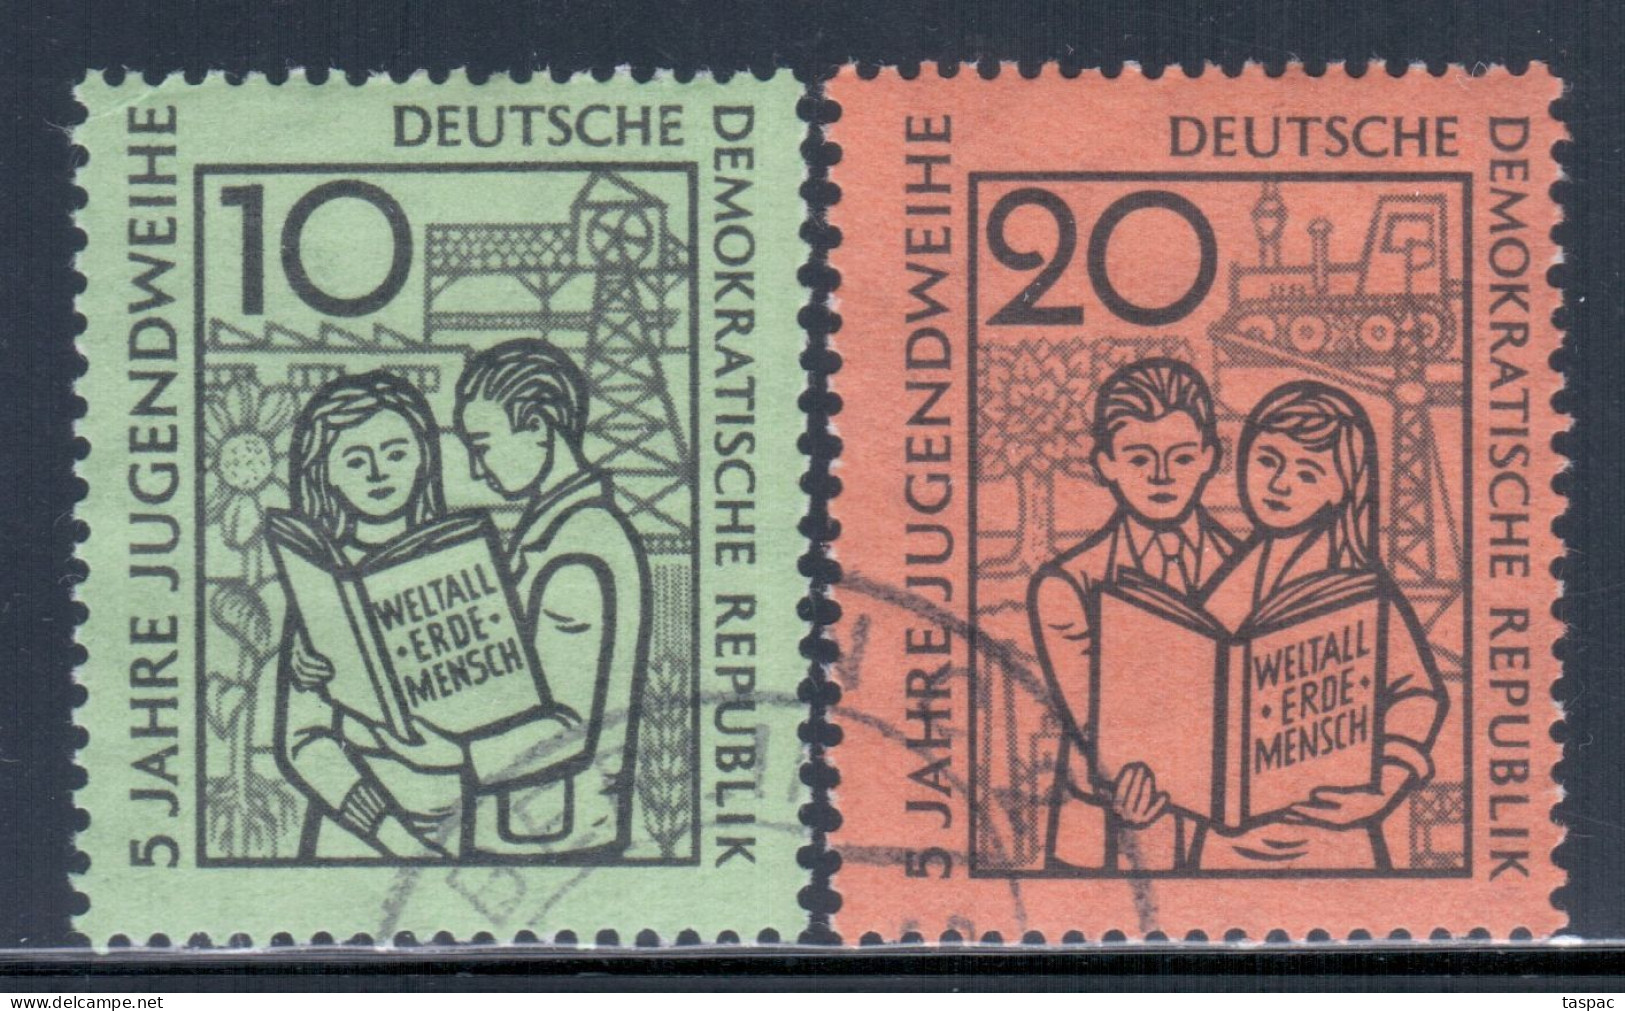 East Germany / DDR 1959 Mi# 680-681 Used - 5 Years Of The Youth Consecration Ceremony / Space - Europe